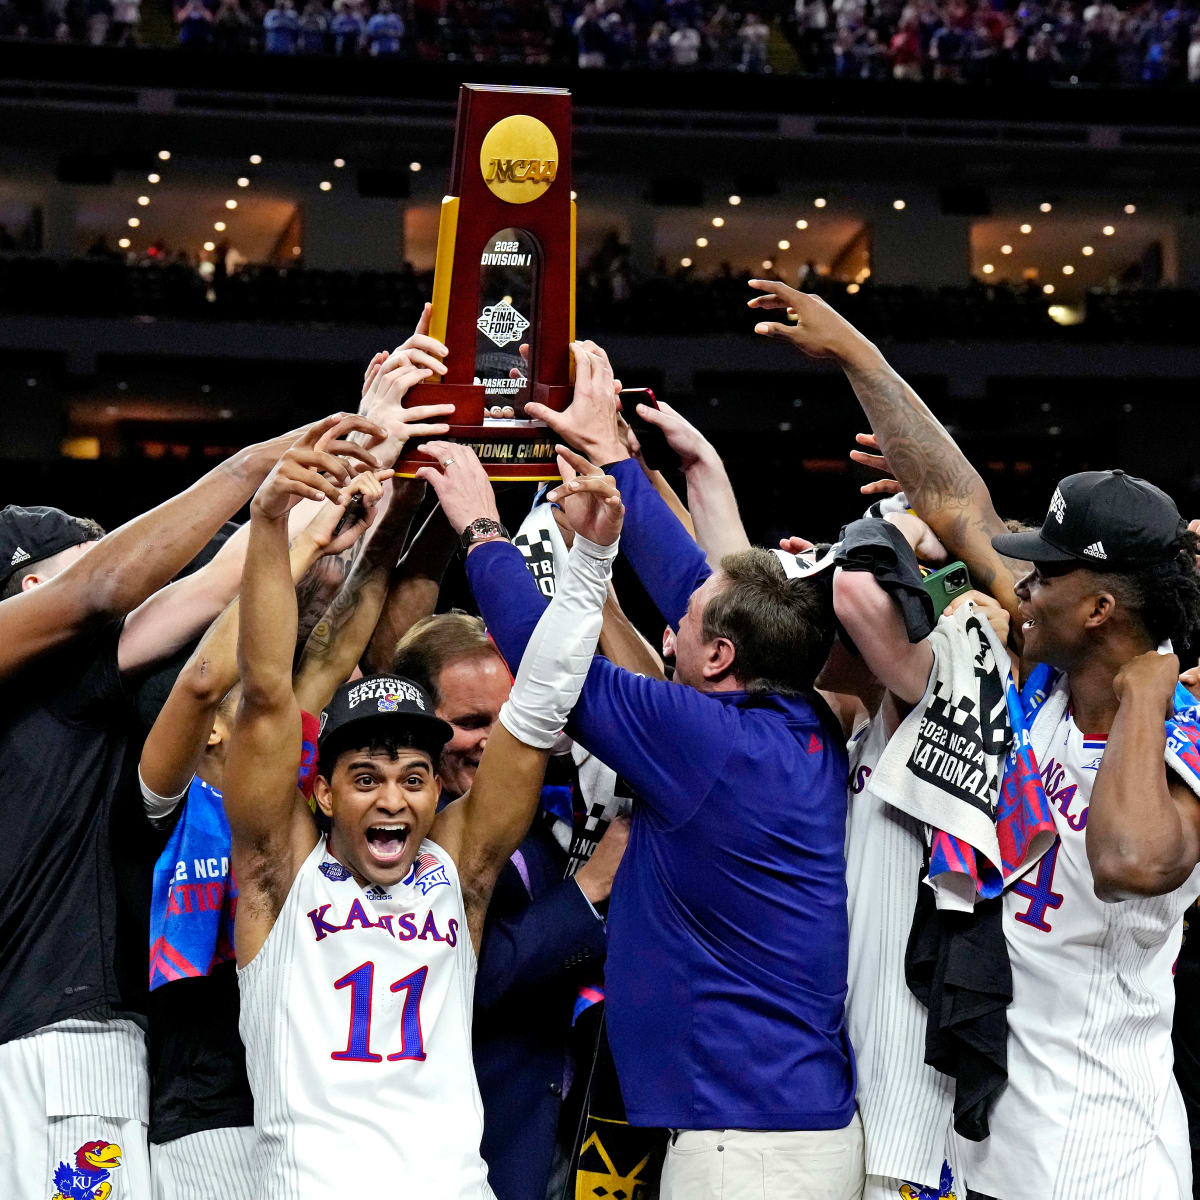 Kansas named 2022 NCAA Men's Basketball Champion after 72-69 comeback over North Carolina - Sports Illustrated Wildcats Daily News, Analysis and More